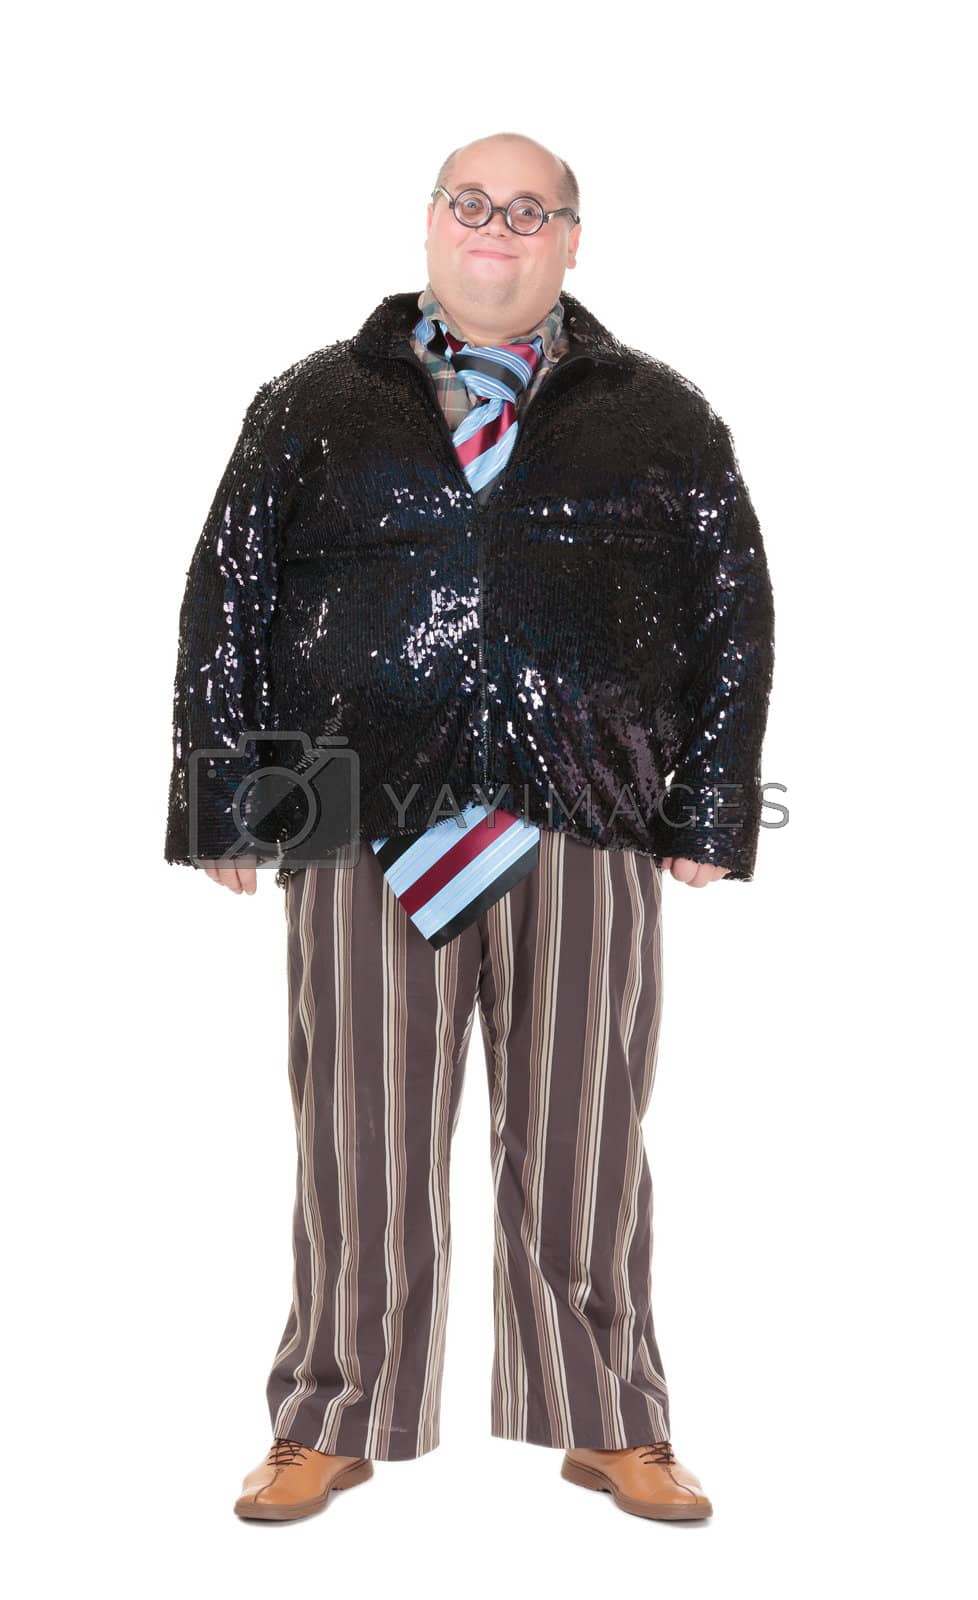 Royalty free image of Obese man with an outrageous fashion sense by Discovod